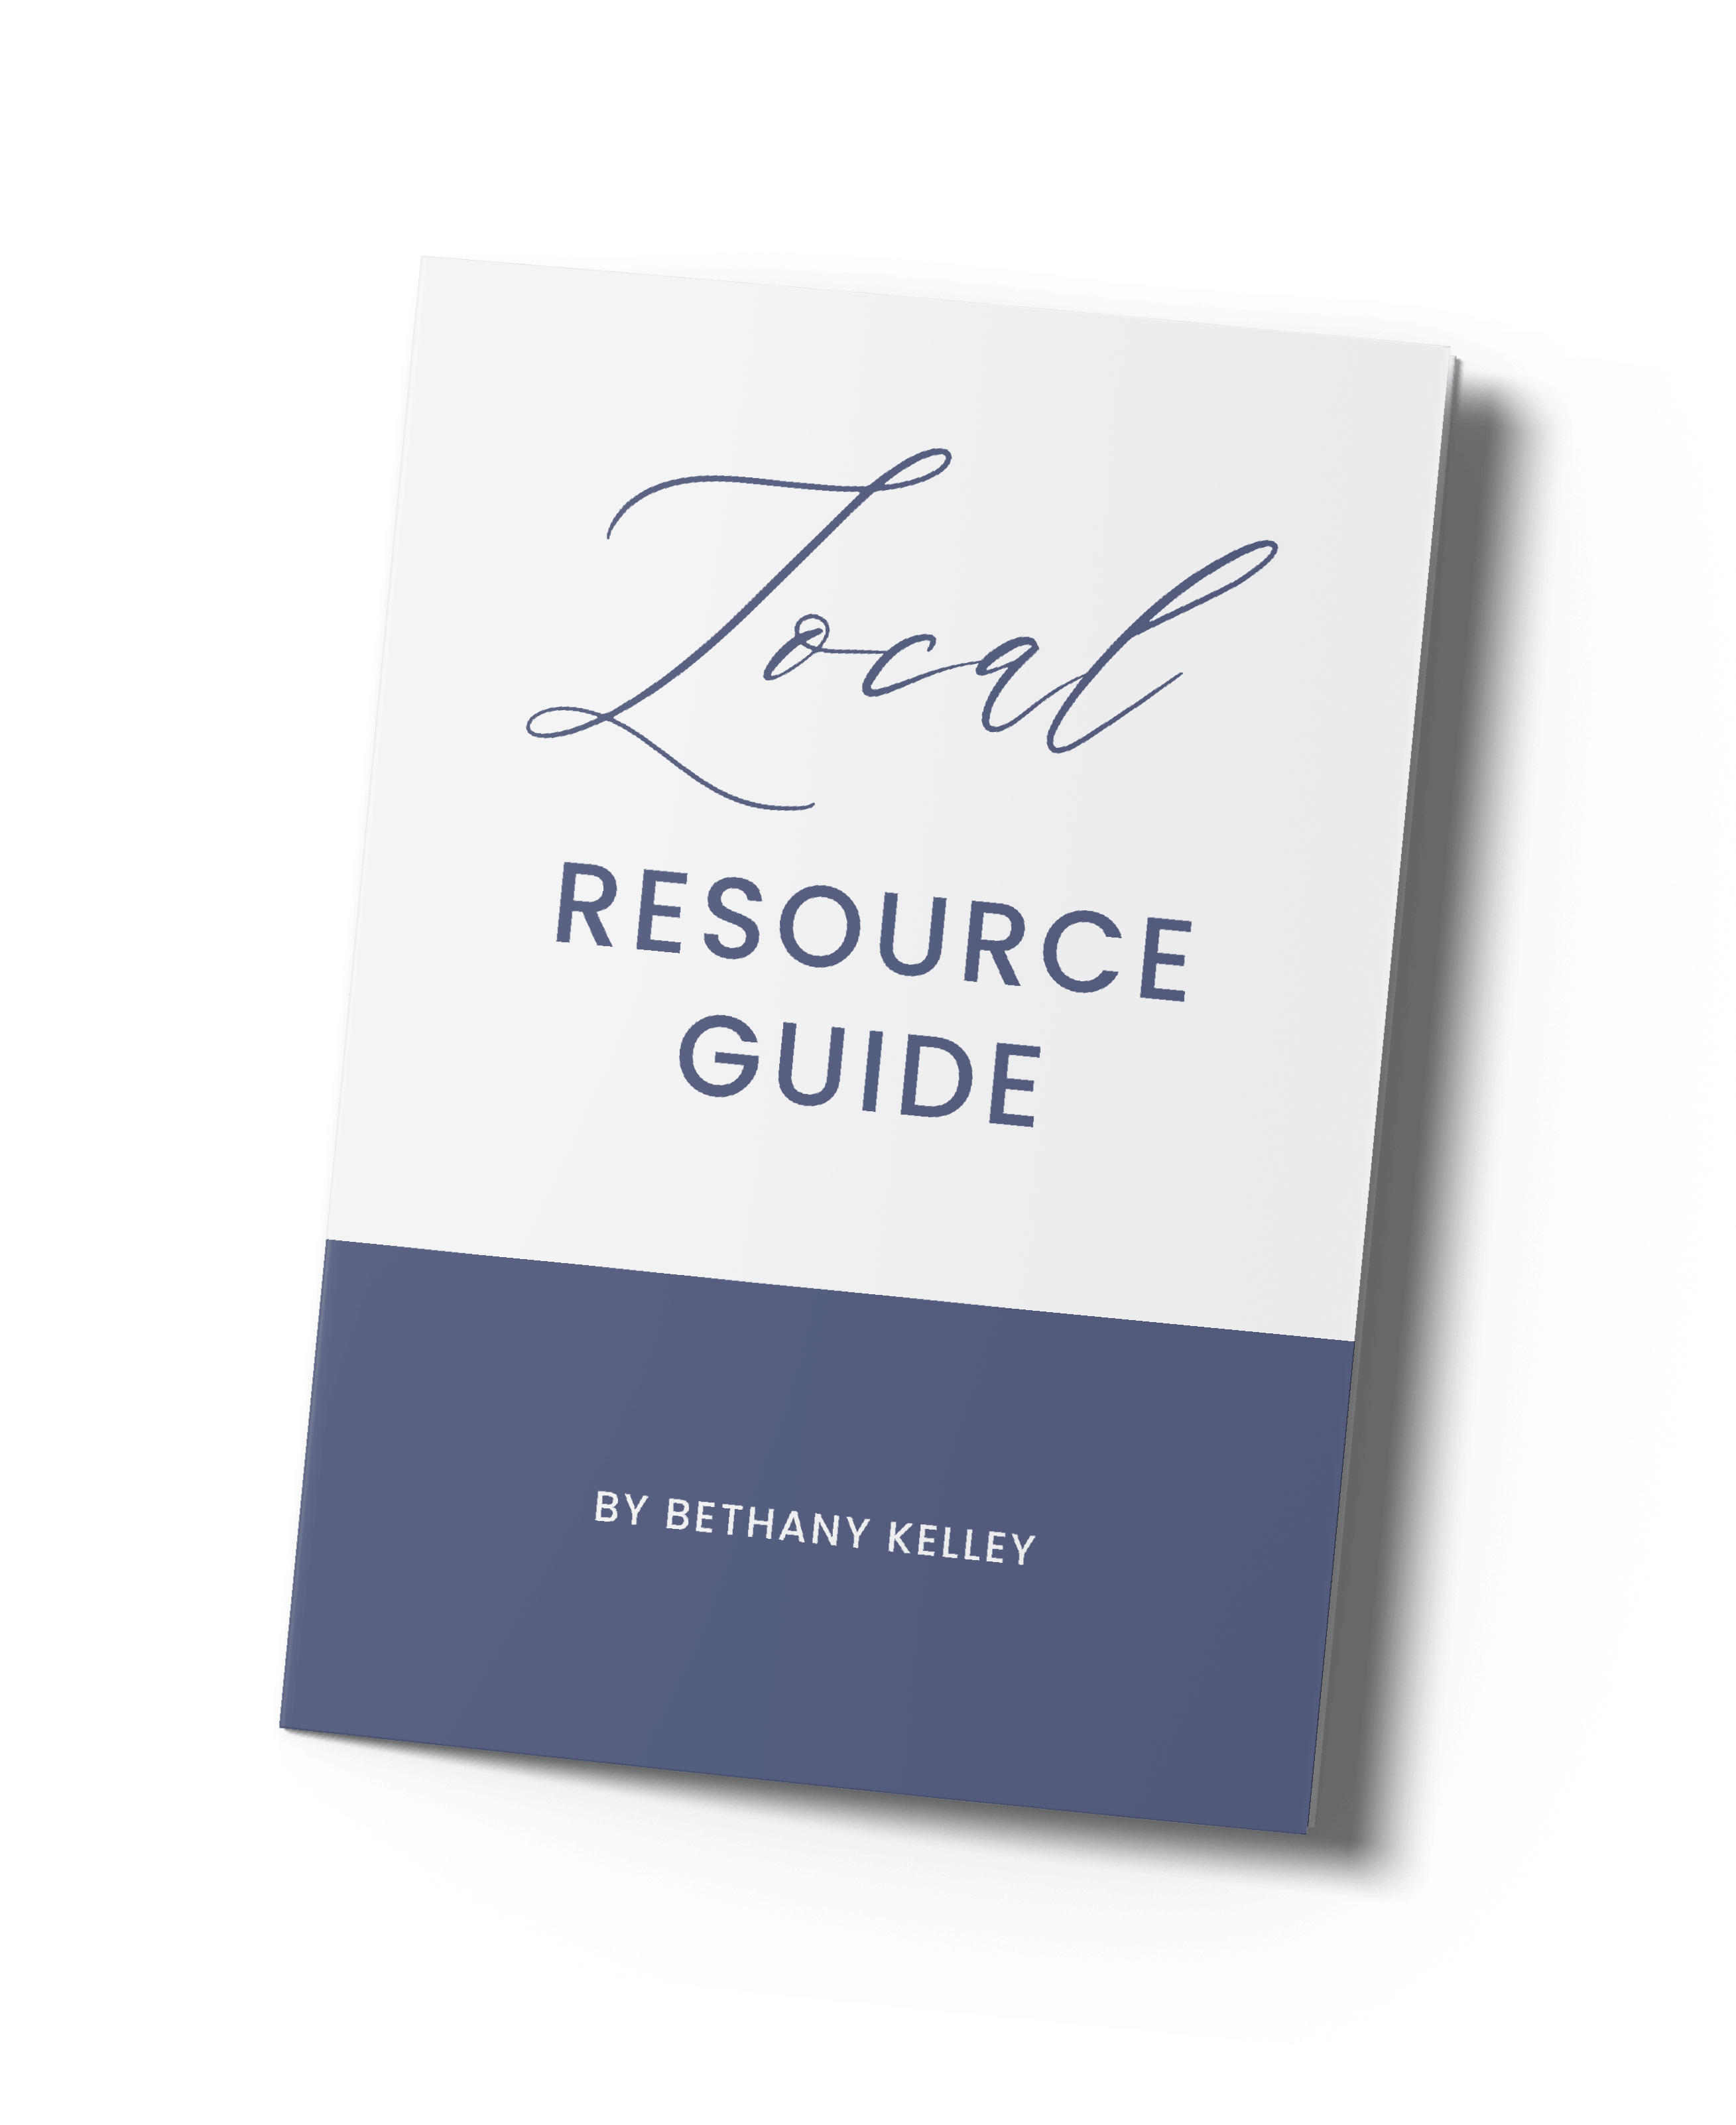 Image of a physical printed pamphlet with the title, "Local Resource Guide by Bethany Kelley" on the cover.